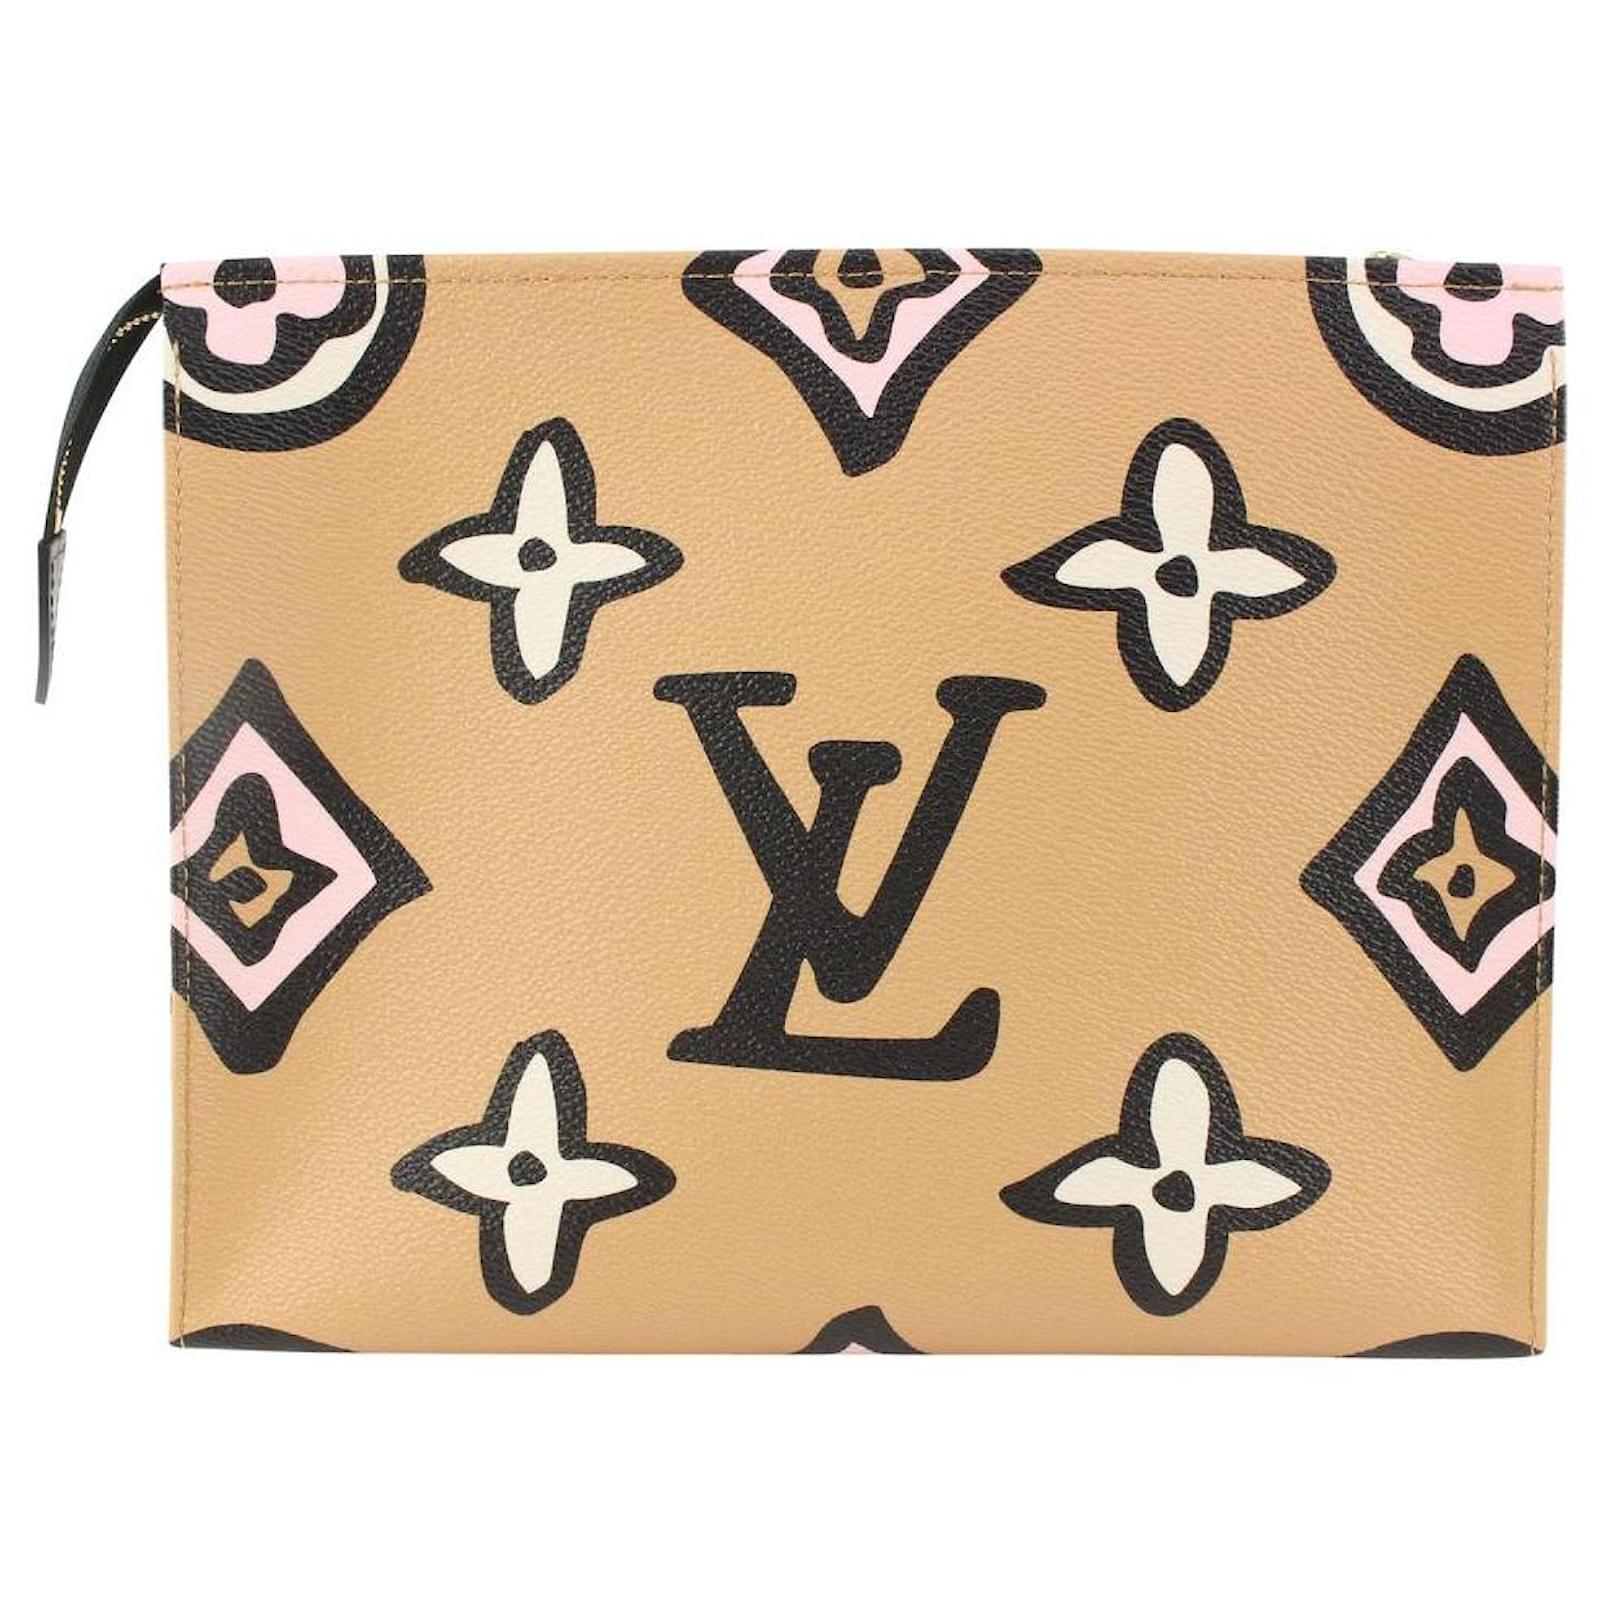 2021 No Longer Available Louis Vuitton Wild At Heart Clutch. NEW